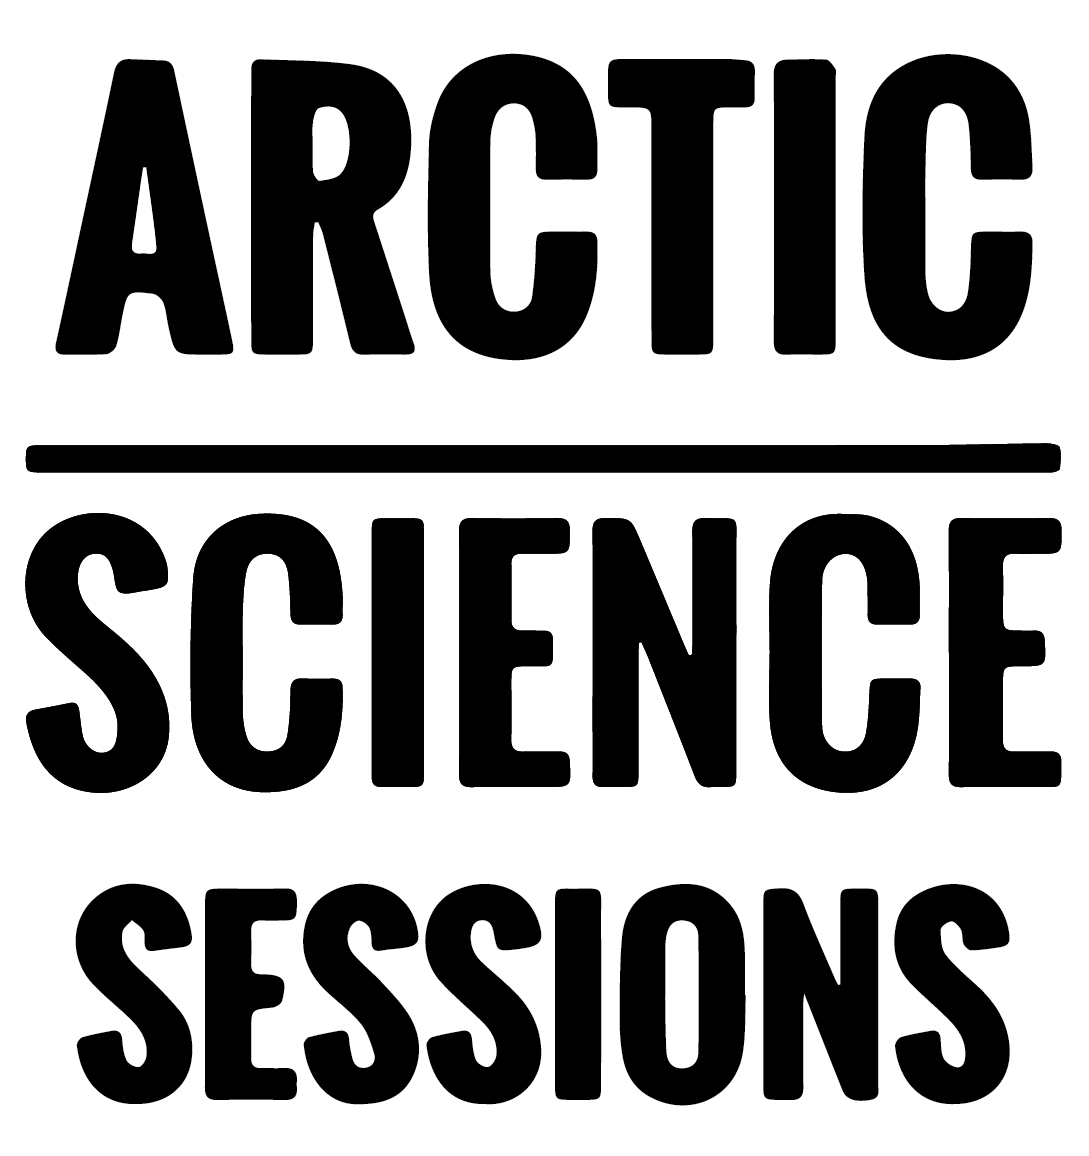 Arctic Science Sessions